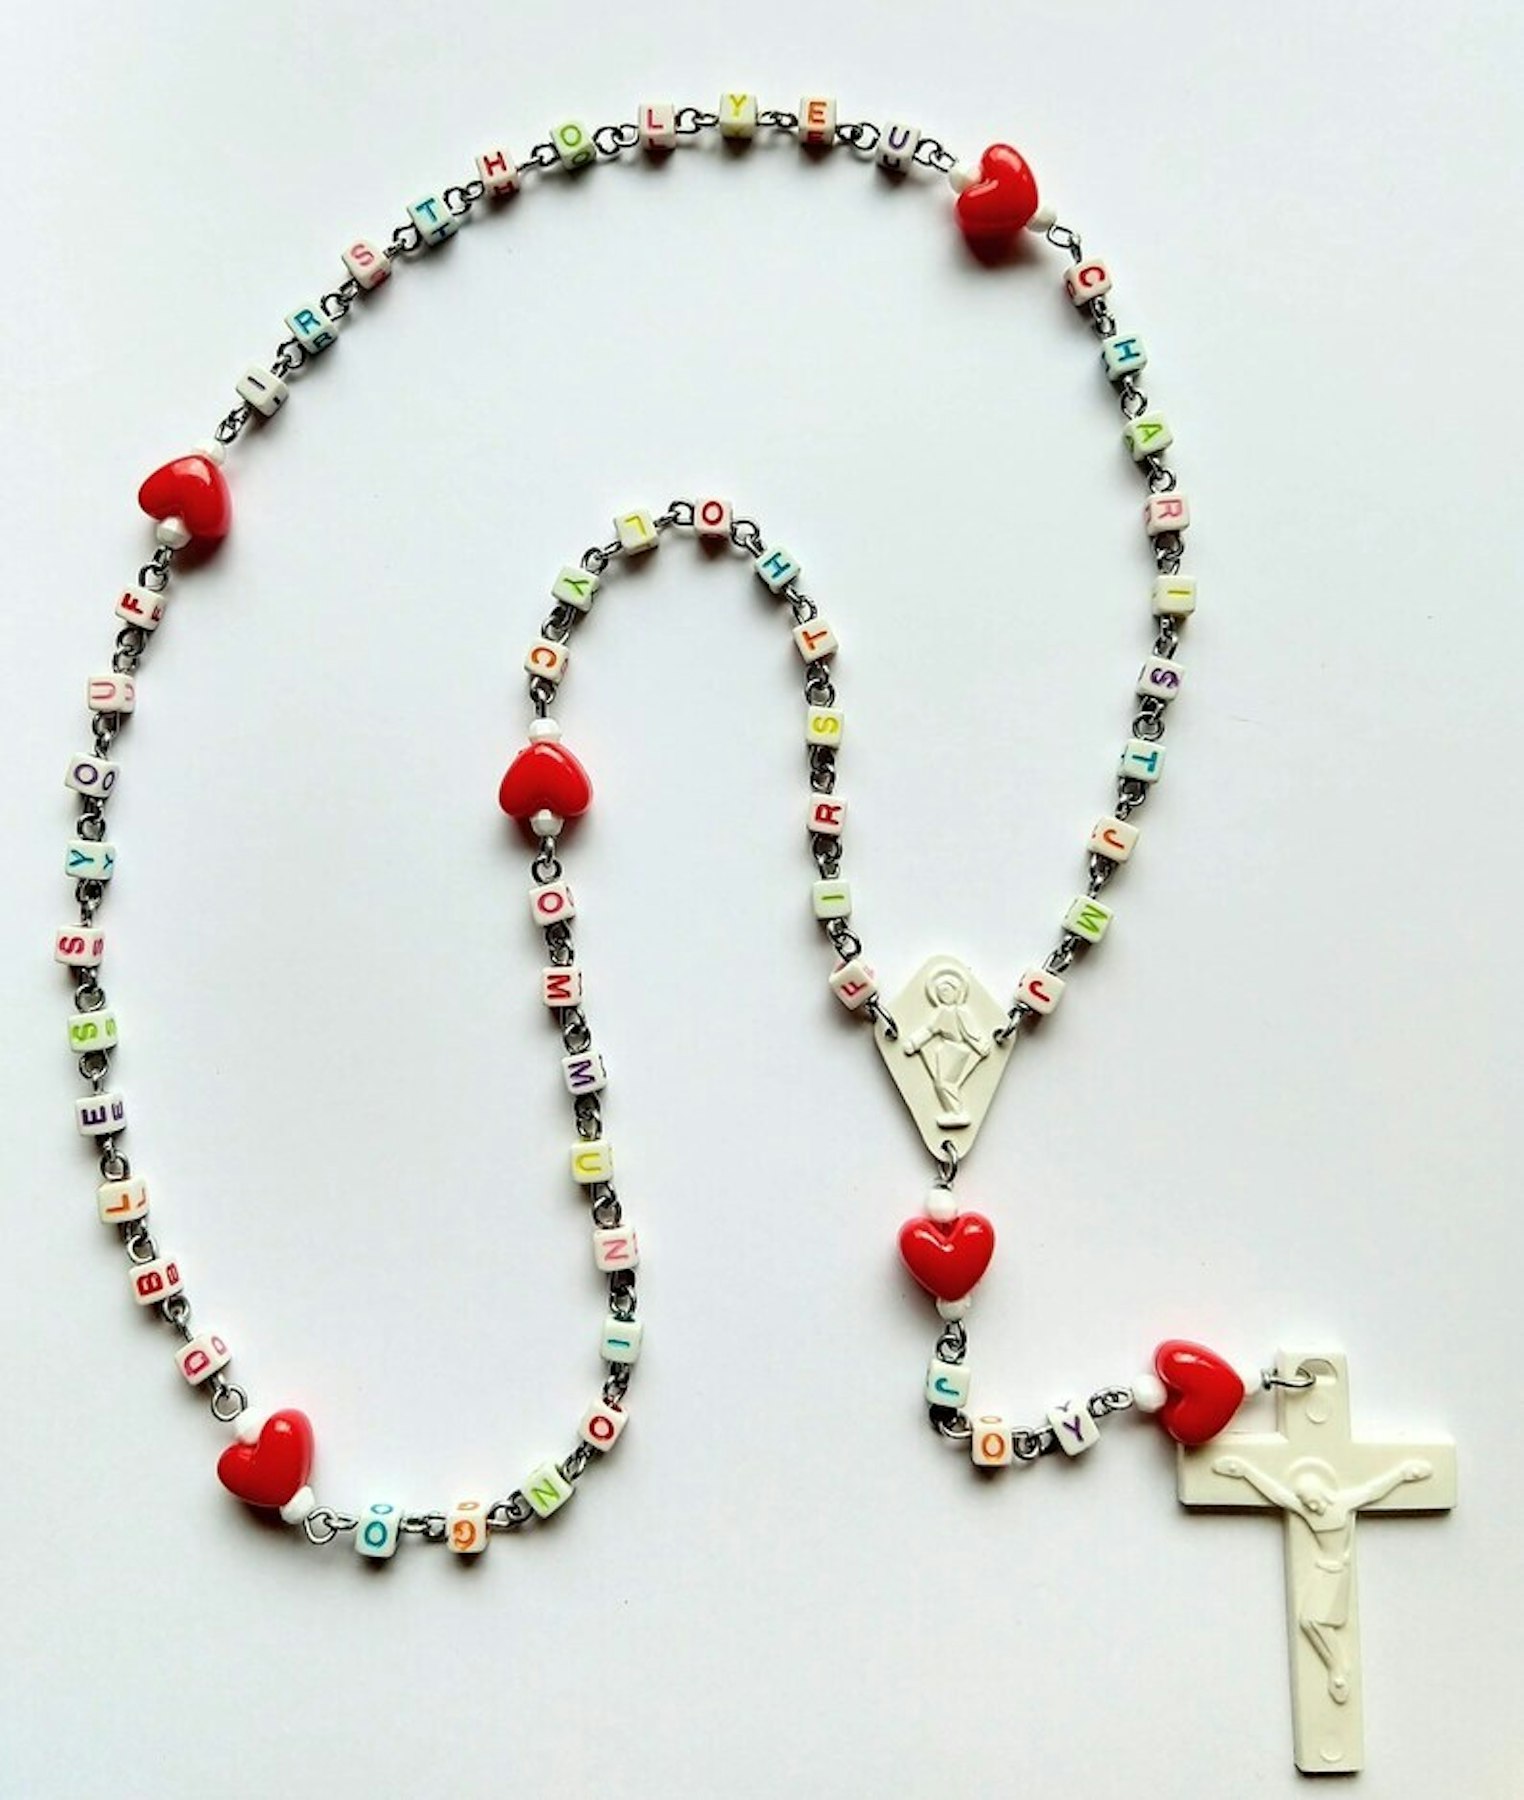 Free Cord Rosary Beginner's Kit - Our Lady's Rosary Makers